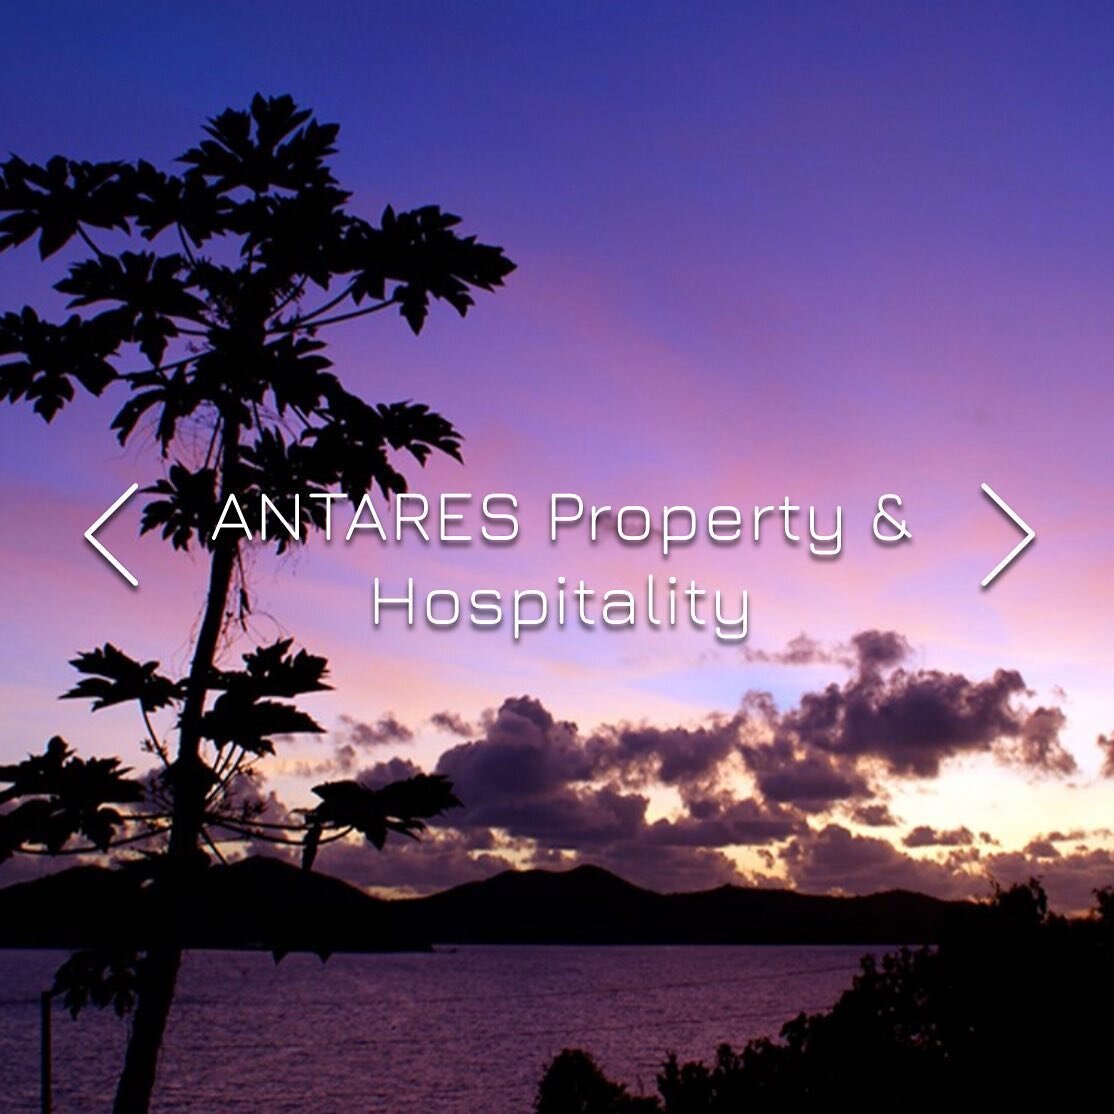 Check out Antares.Vi for your next island stay on #stjohnusvi and #coralbaystjohn The Antares team and  @islandhoststj_concierge have put together an impressive app and program for welcoming guests safely back to our shores😎🌞❤️ Visit here at  https